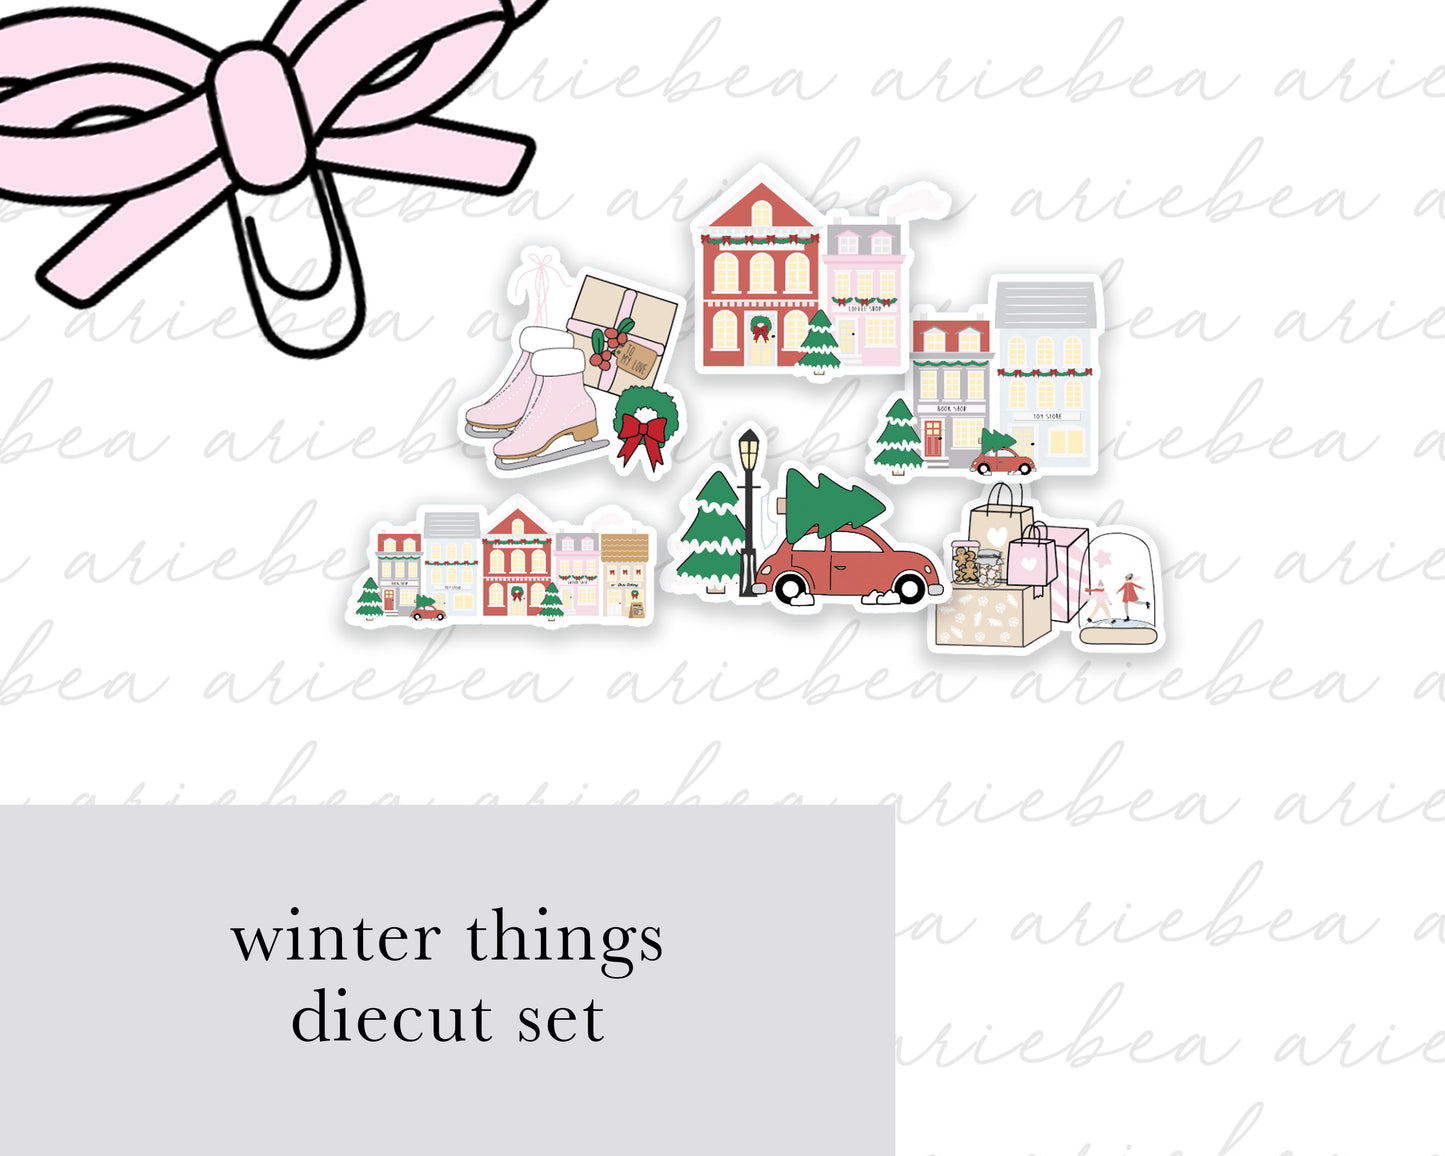 Winter Things Collection Full Kit